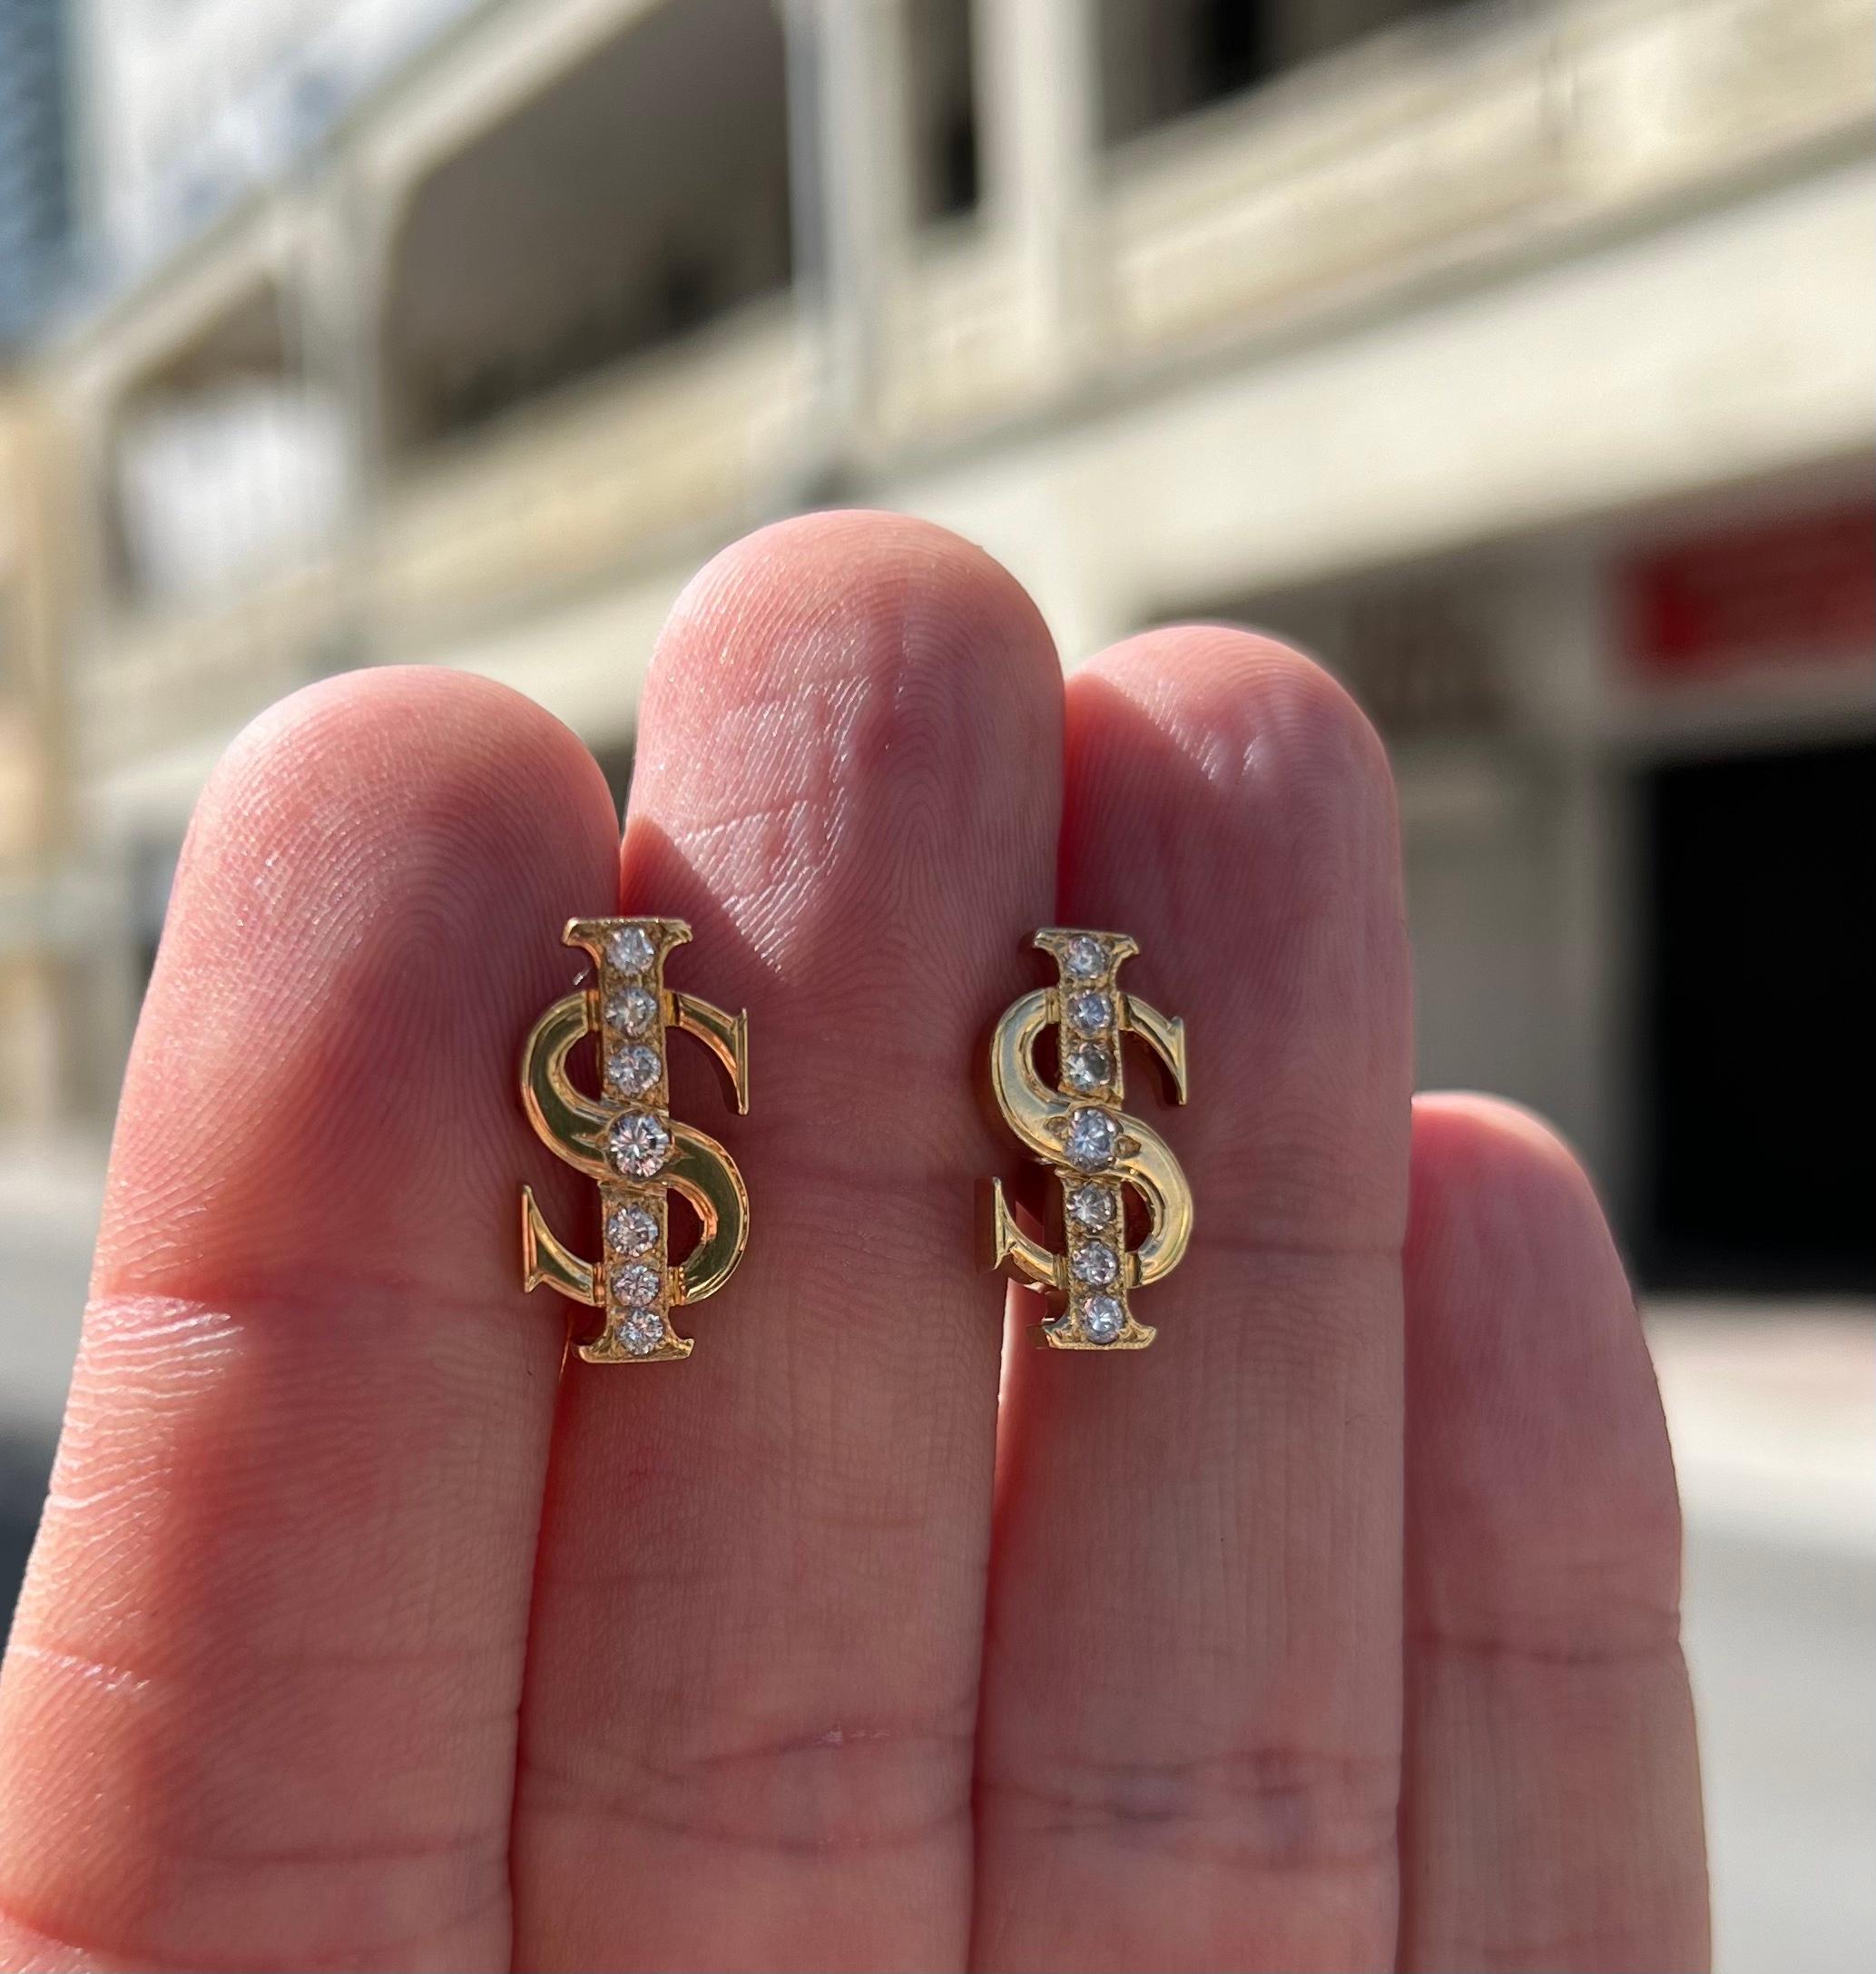  Retro Diamond Dollar Sign Cufflinks  18k Yellow Gold Mayors In Excellent Condition For Sale In MIAMI, FL